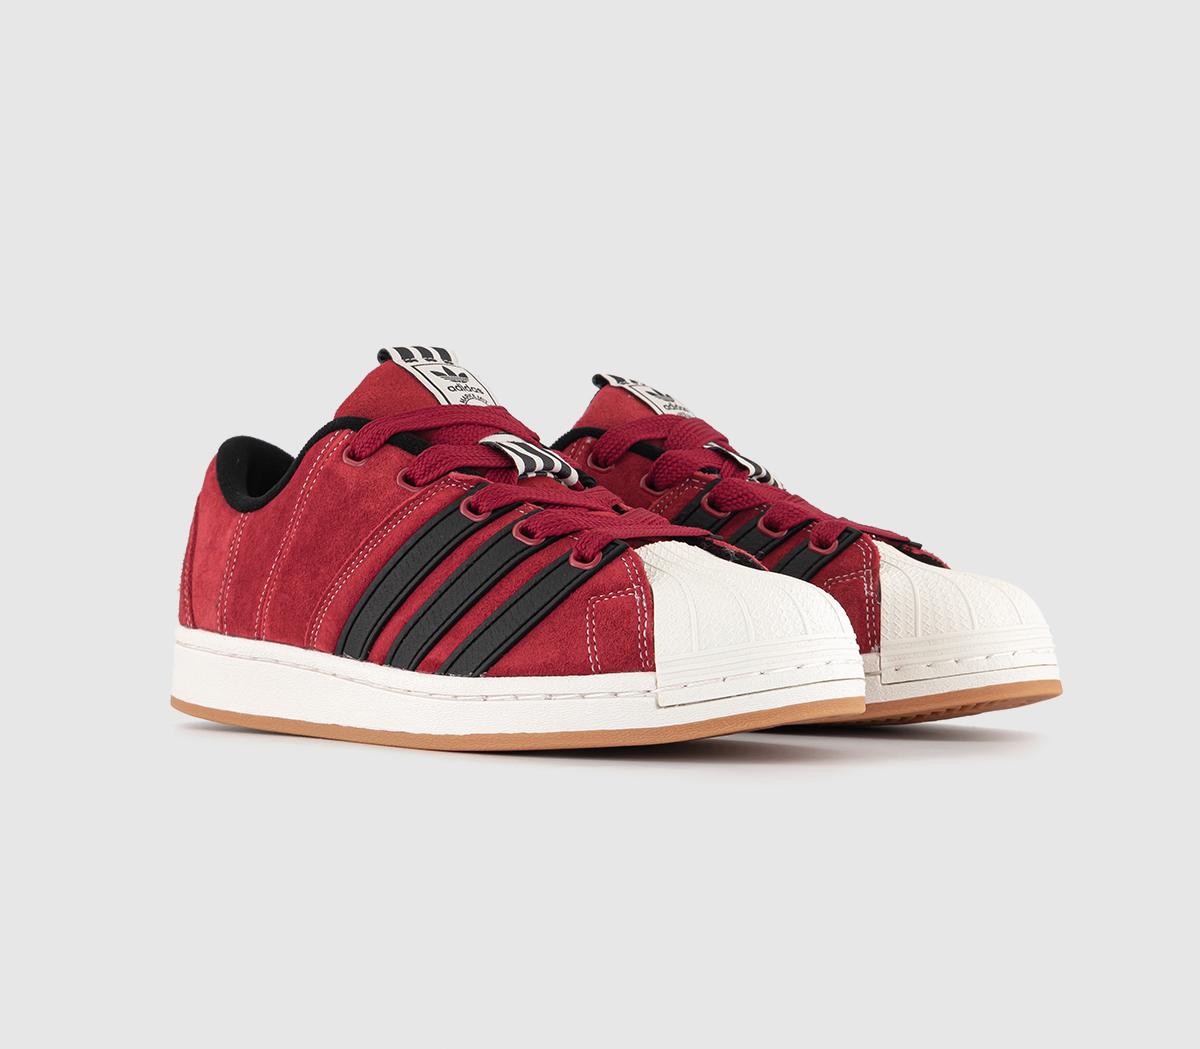 adidas Supermodified Ynuk Trainers Power Red Core Black Off White - Men ...